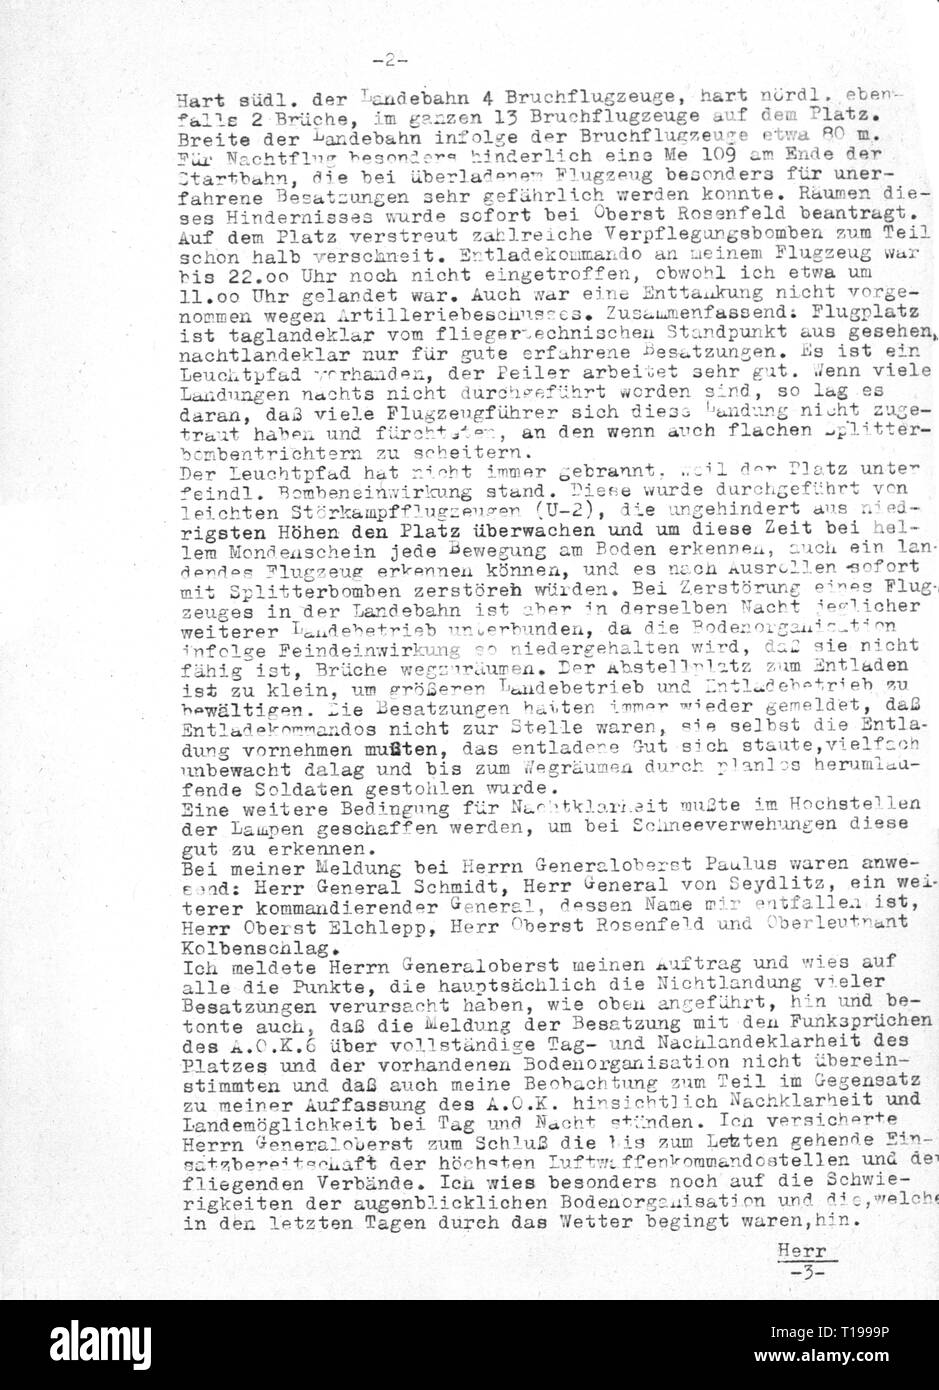 Second World War / WWII, Russia, Battle of Stalingrad, 23.8.1942 - 2.2.1943, report of major Erich Thiel, Commanding Officer of III Group, Fighter Wing 27 'Boelcke', about the condition of the airfield Gumrak and the consultation with Field Marshal General Friedrich Paulus, general commanding 6th Army, to Field Marshal Erhard Milch, Inspector General of the Luftwaffe (German Air Force), command post Stalino, 21.1.1943, copy, page 2, dispatch, despatch, dispatches, despatches, encirclement, German Luftwaffe (German Air Force), Wehrmacht, armed for, Additional-Rights-Clearance-Info-Not-Available Stock Photo